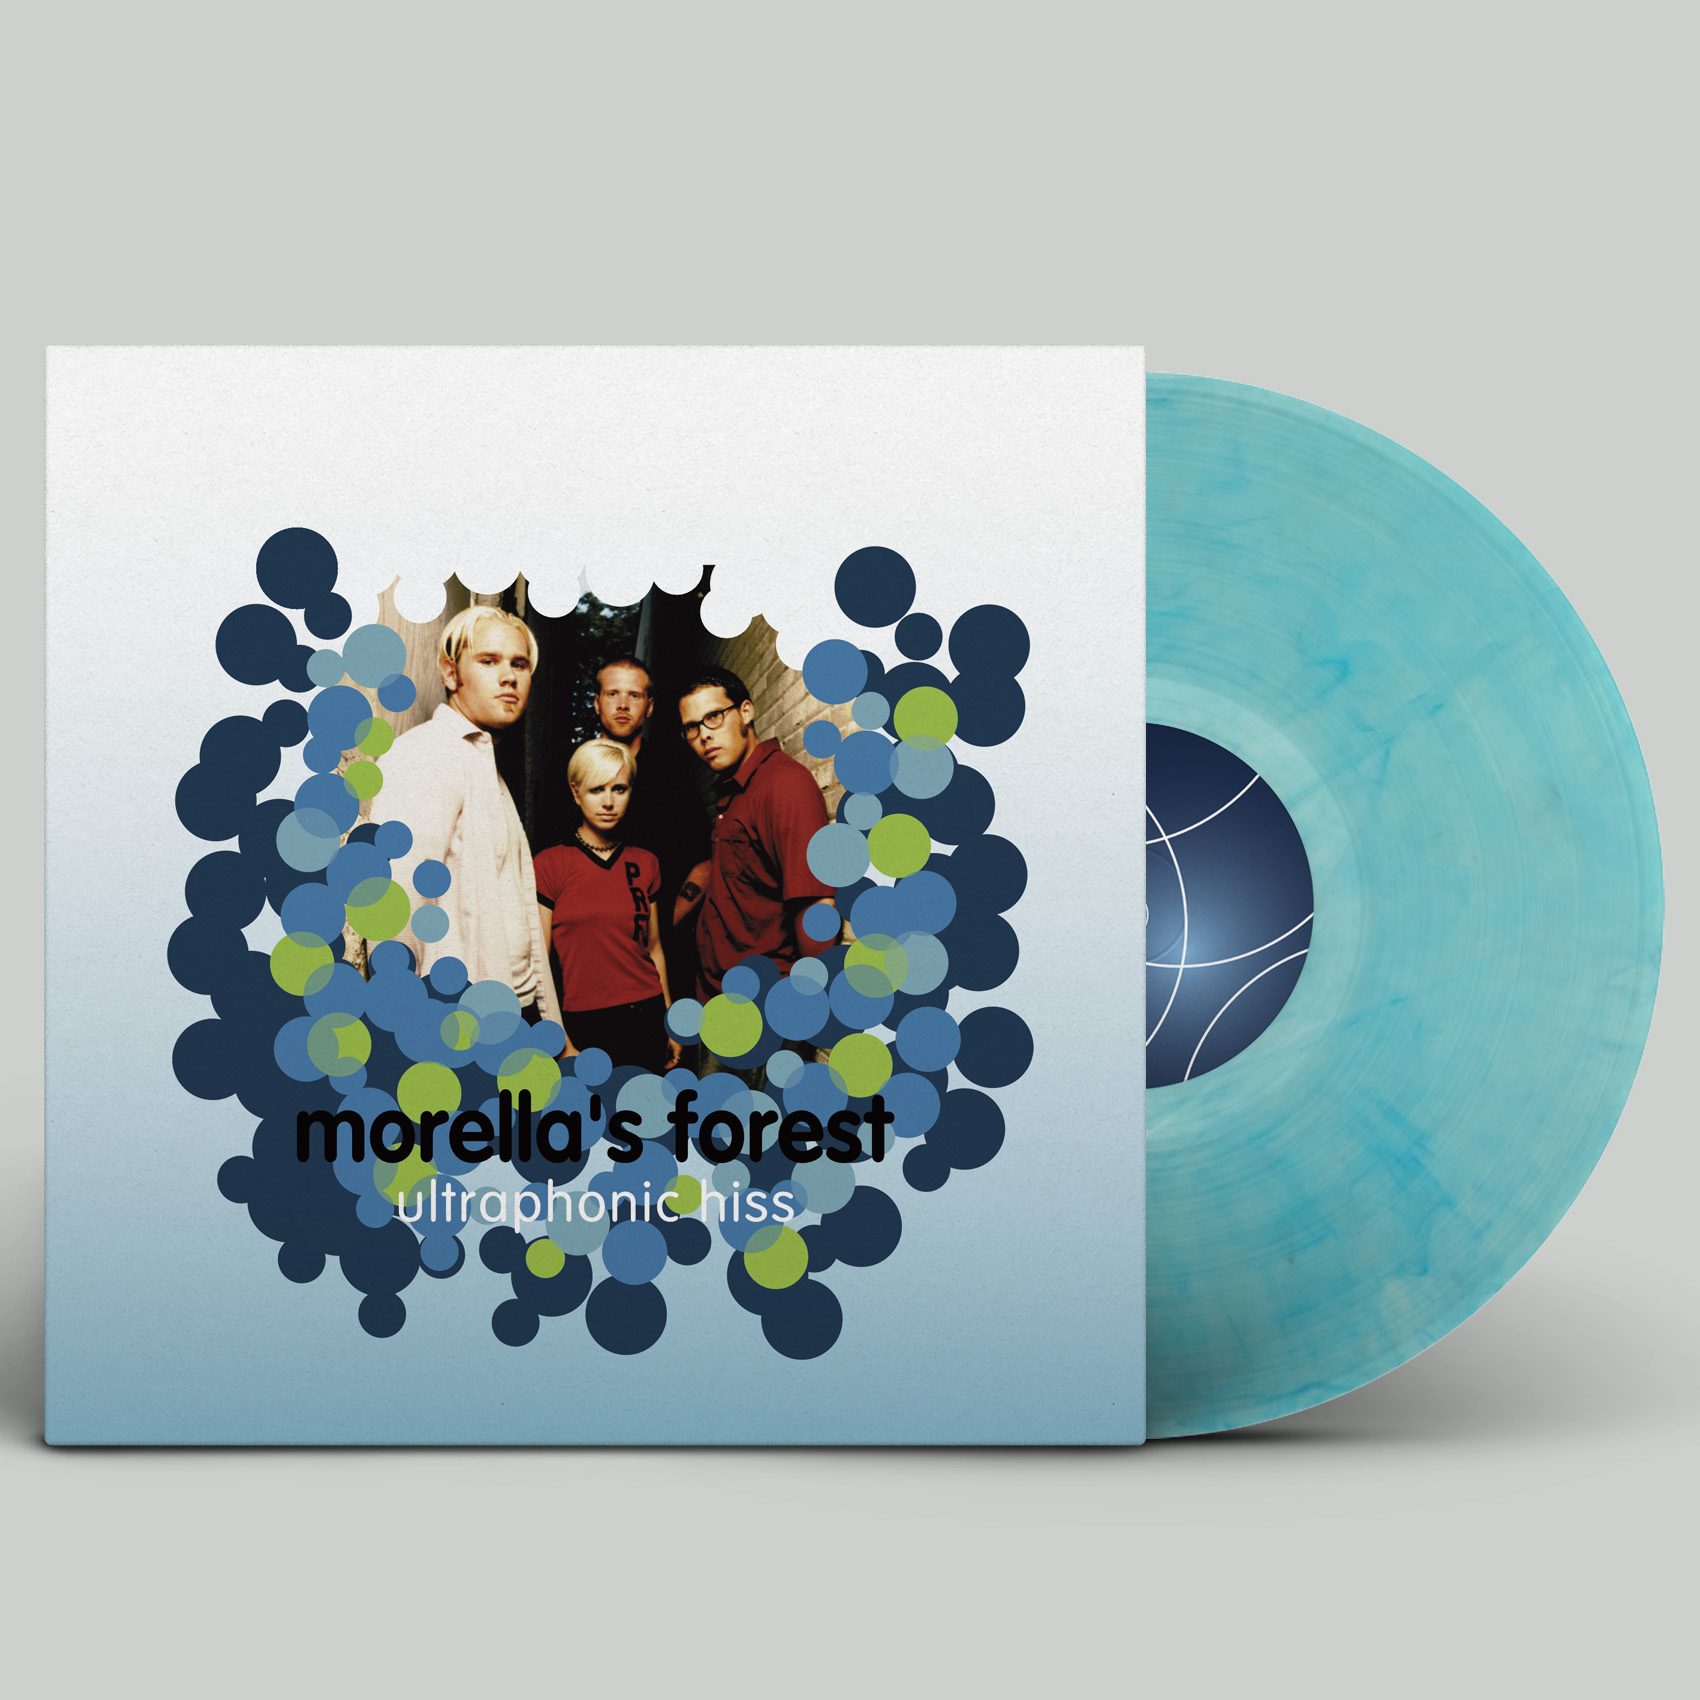 Announcing the reissue of Morella’s Forest’s Ultraphonic Hiss!